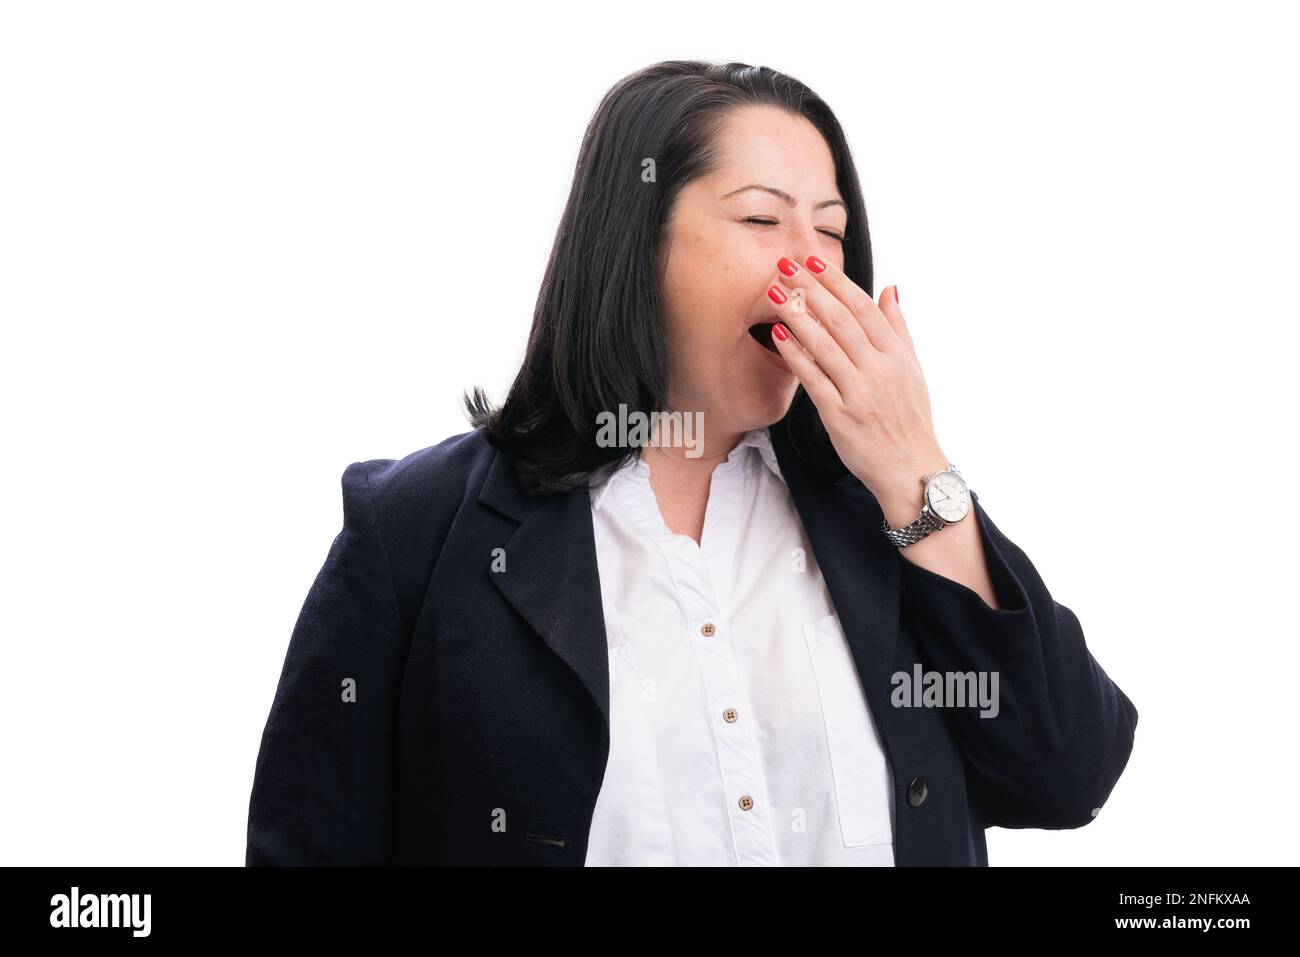 Tired hardworking businesswoman wearing smart casual suit covering mouth as yawning sleepy gesture corporate professional executive concept isolated o Stock Photo